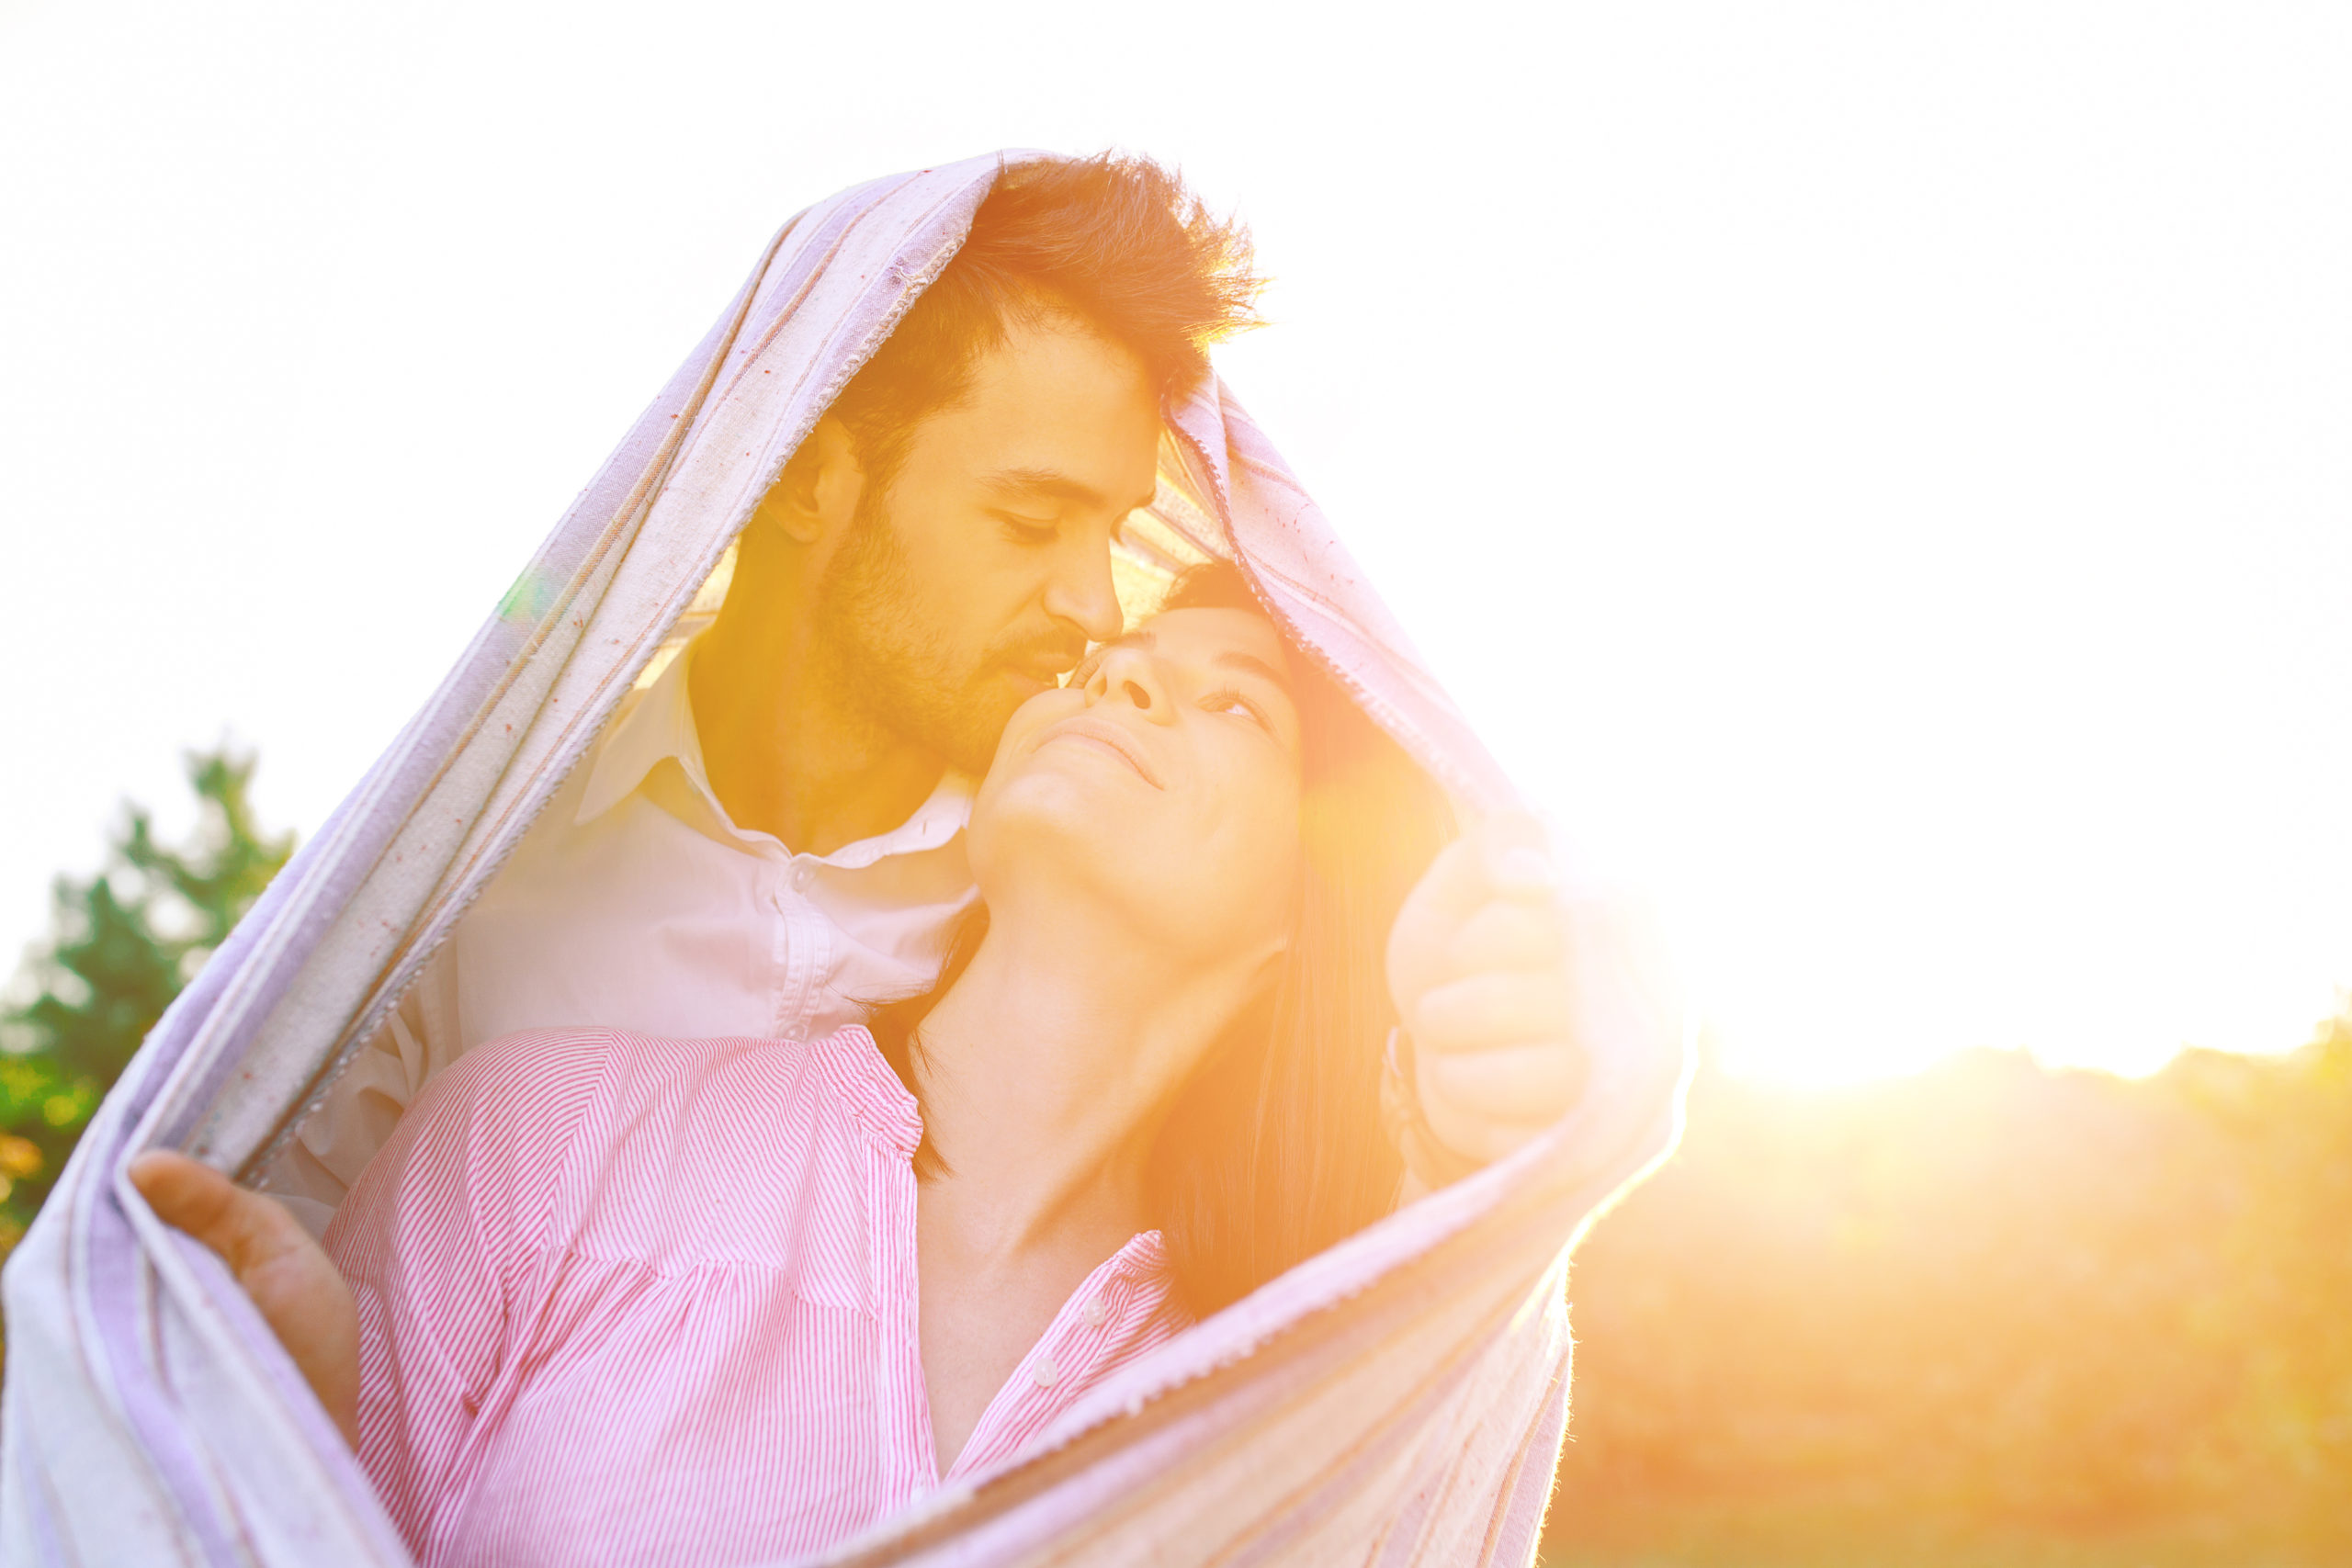 Happy couple portrait wrapped in a blanket enjoy each other in the rays of the sun outdoors